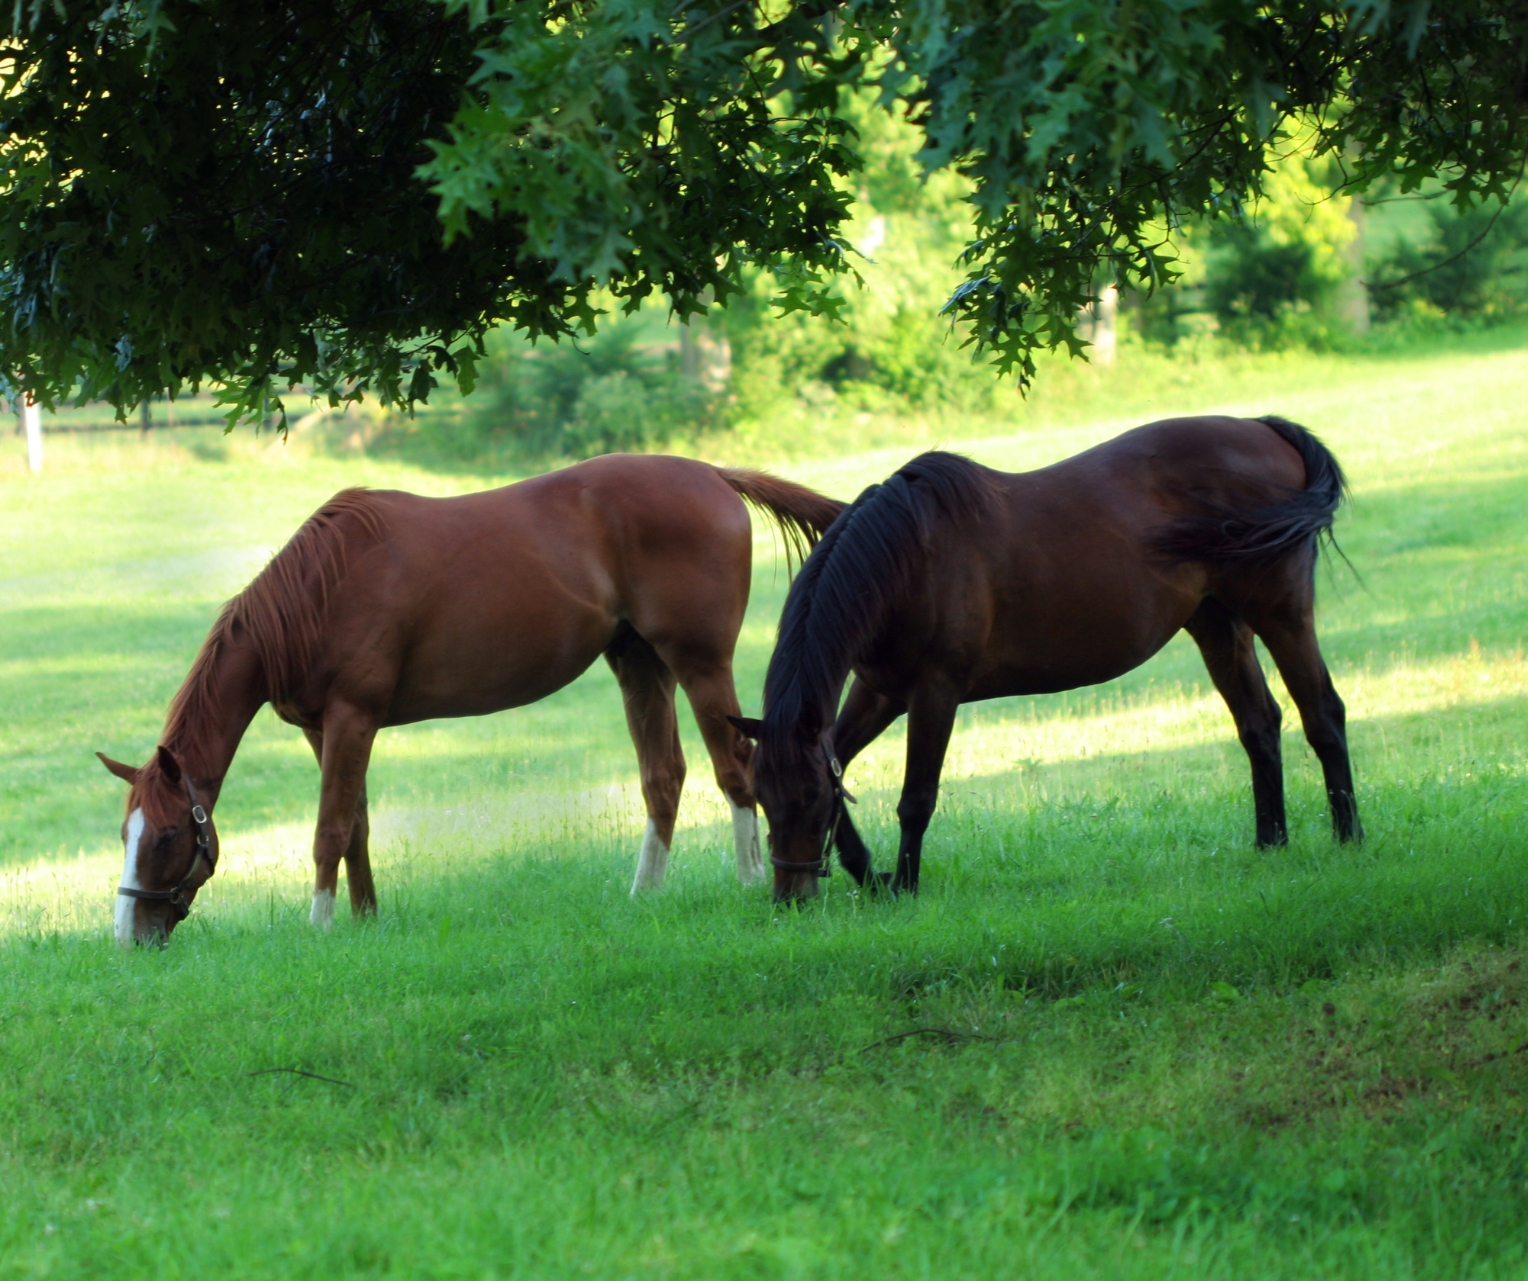 Checking a fecal float on your horses is an important step to caring for their health